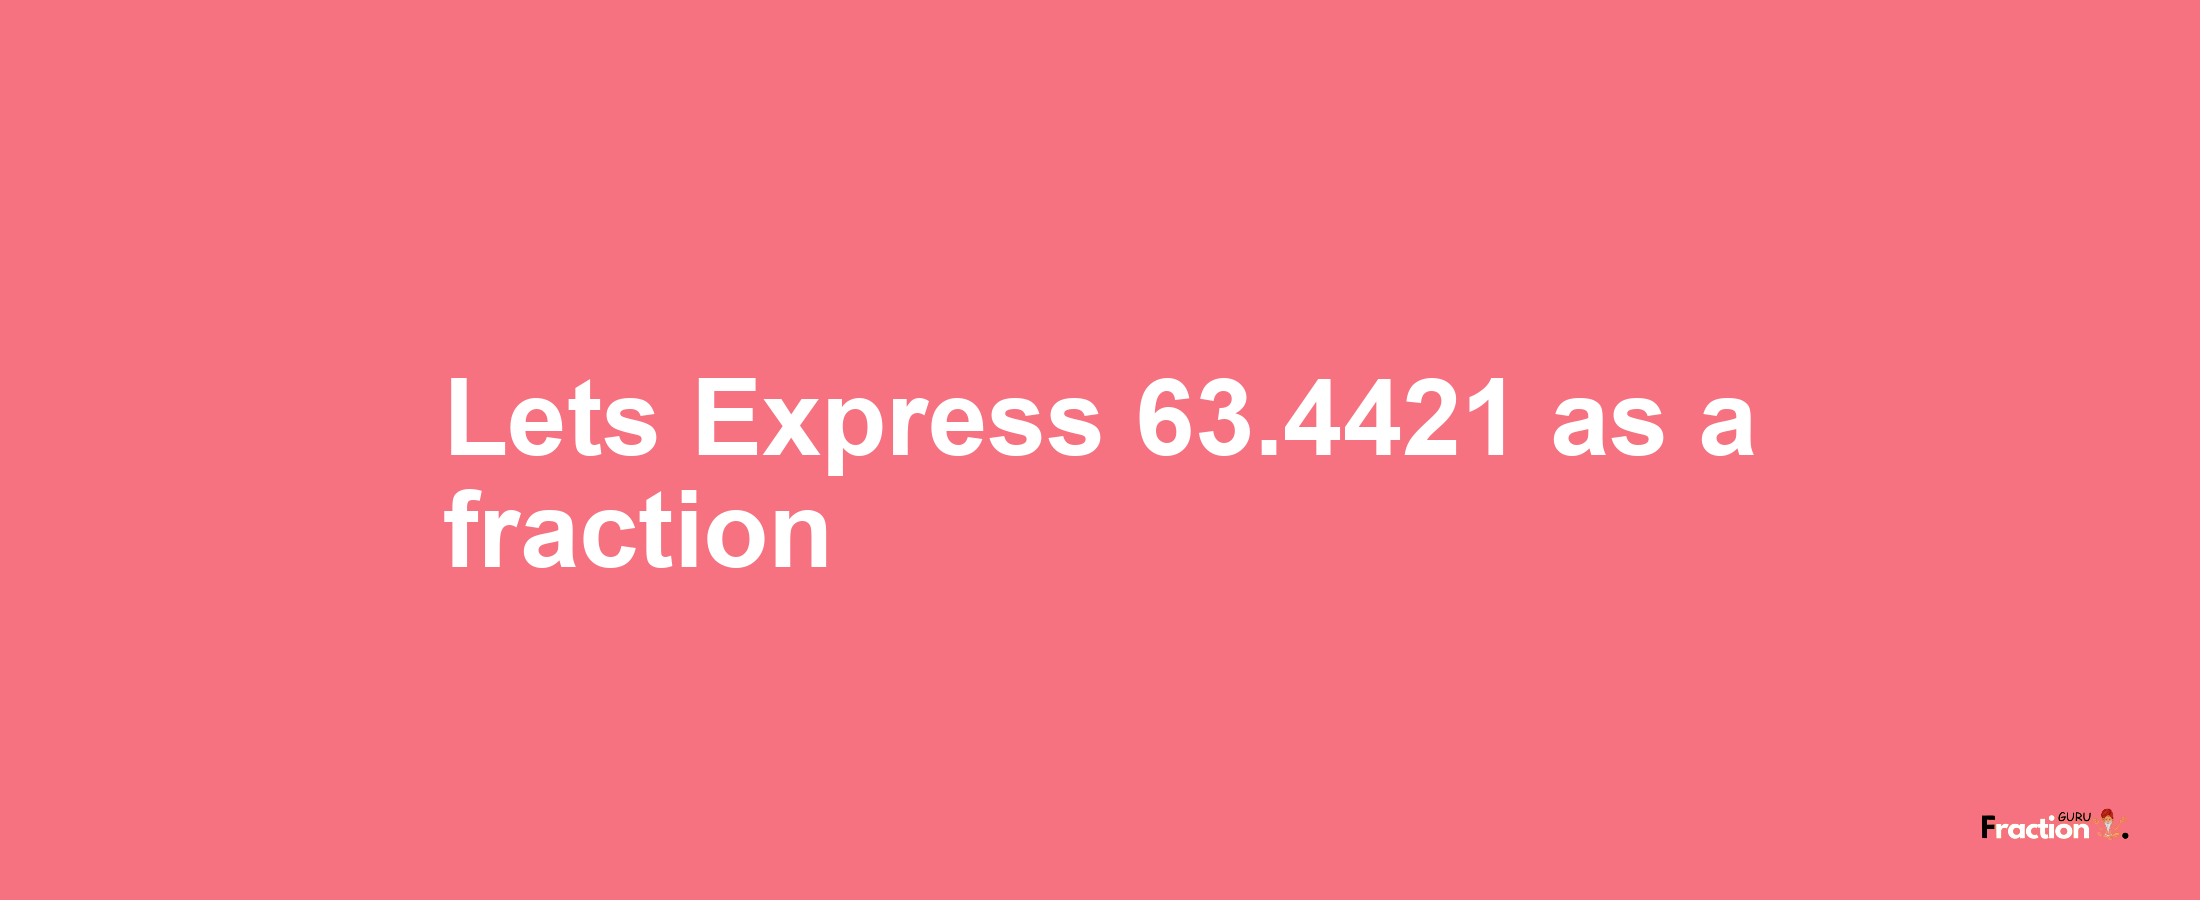 Lets Express 63.4421 as afraction